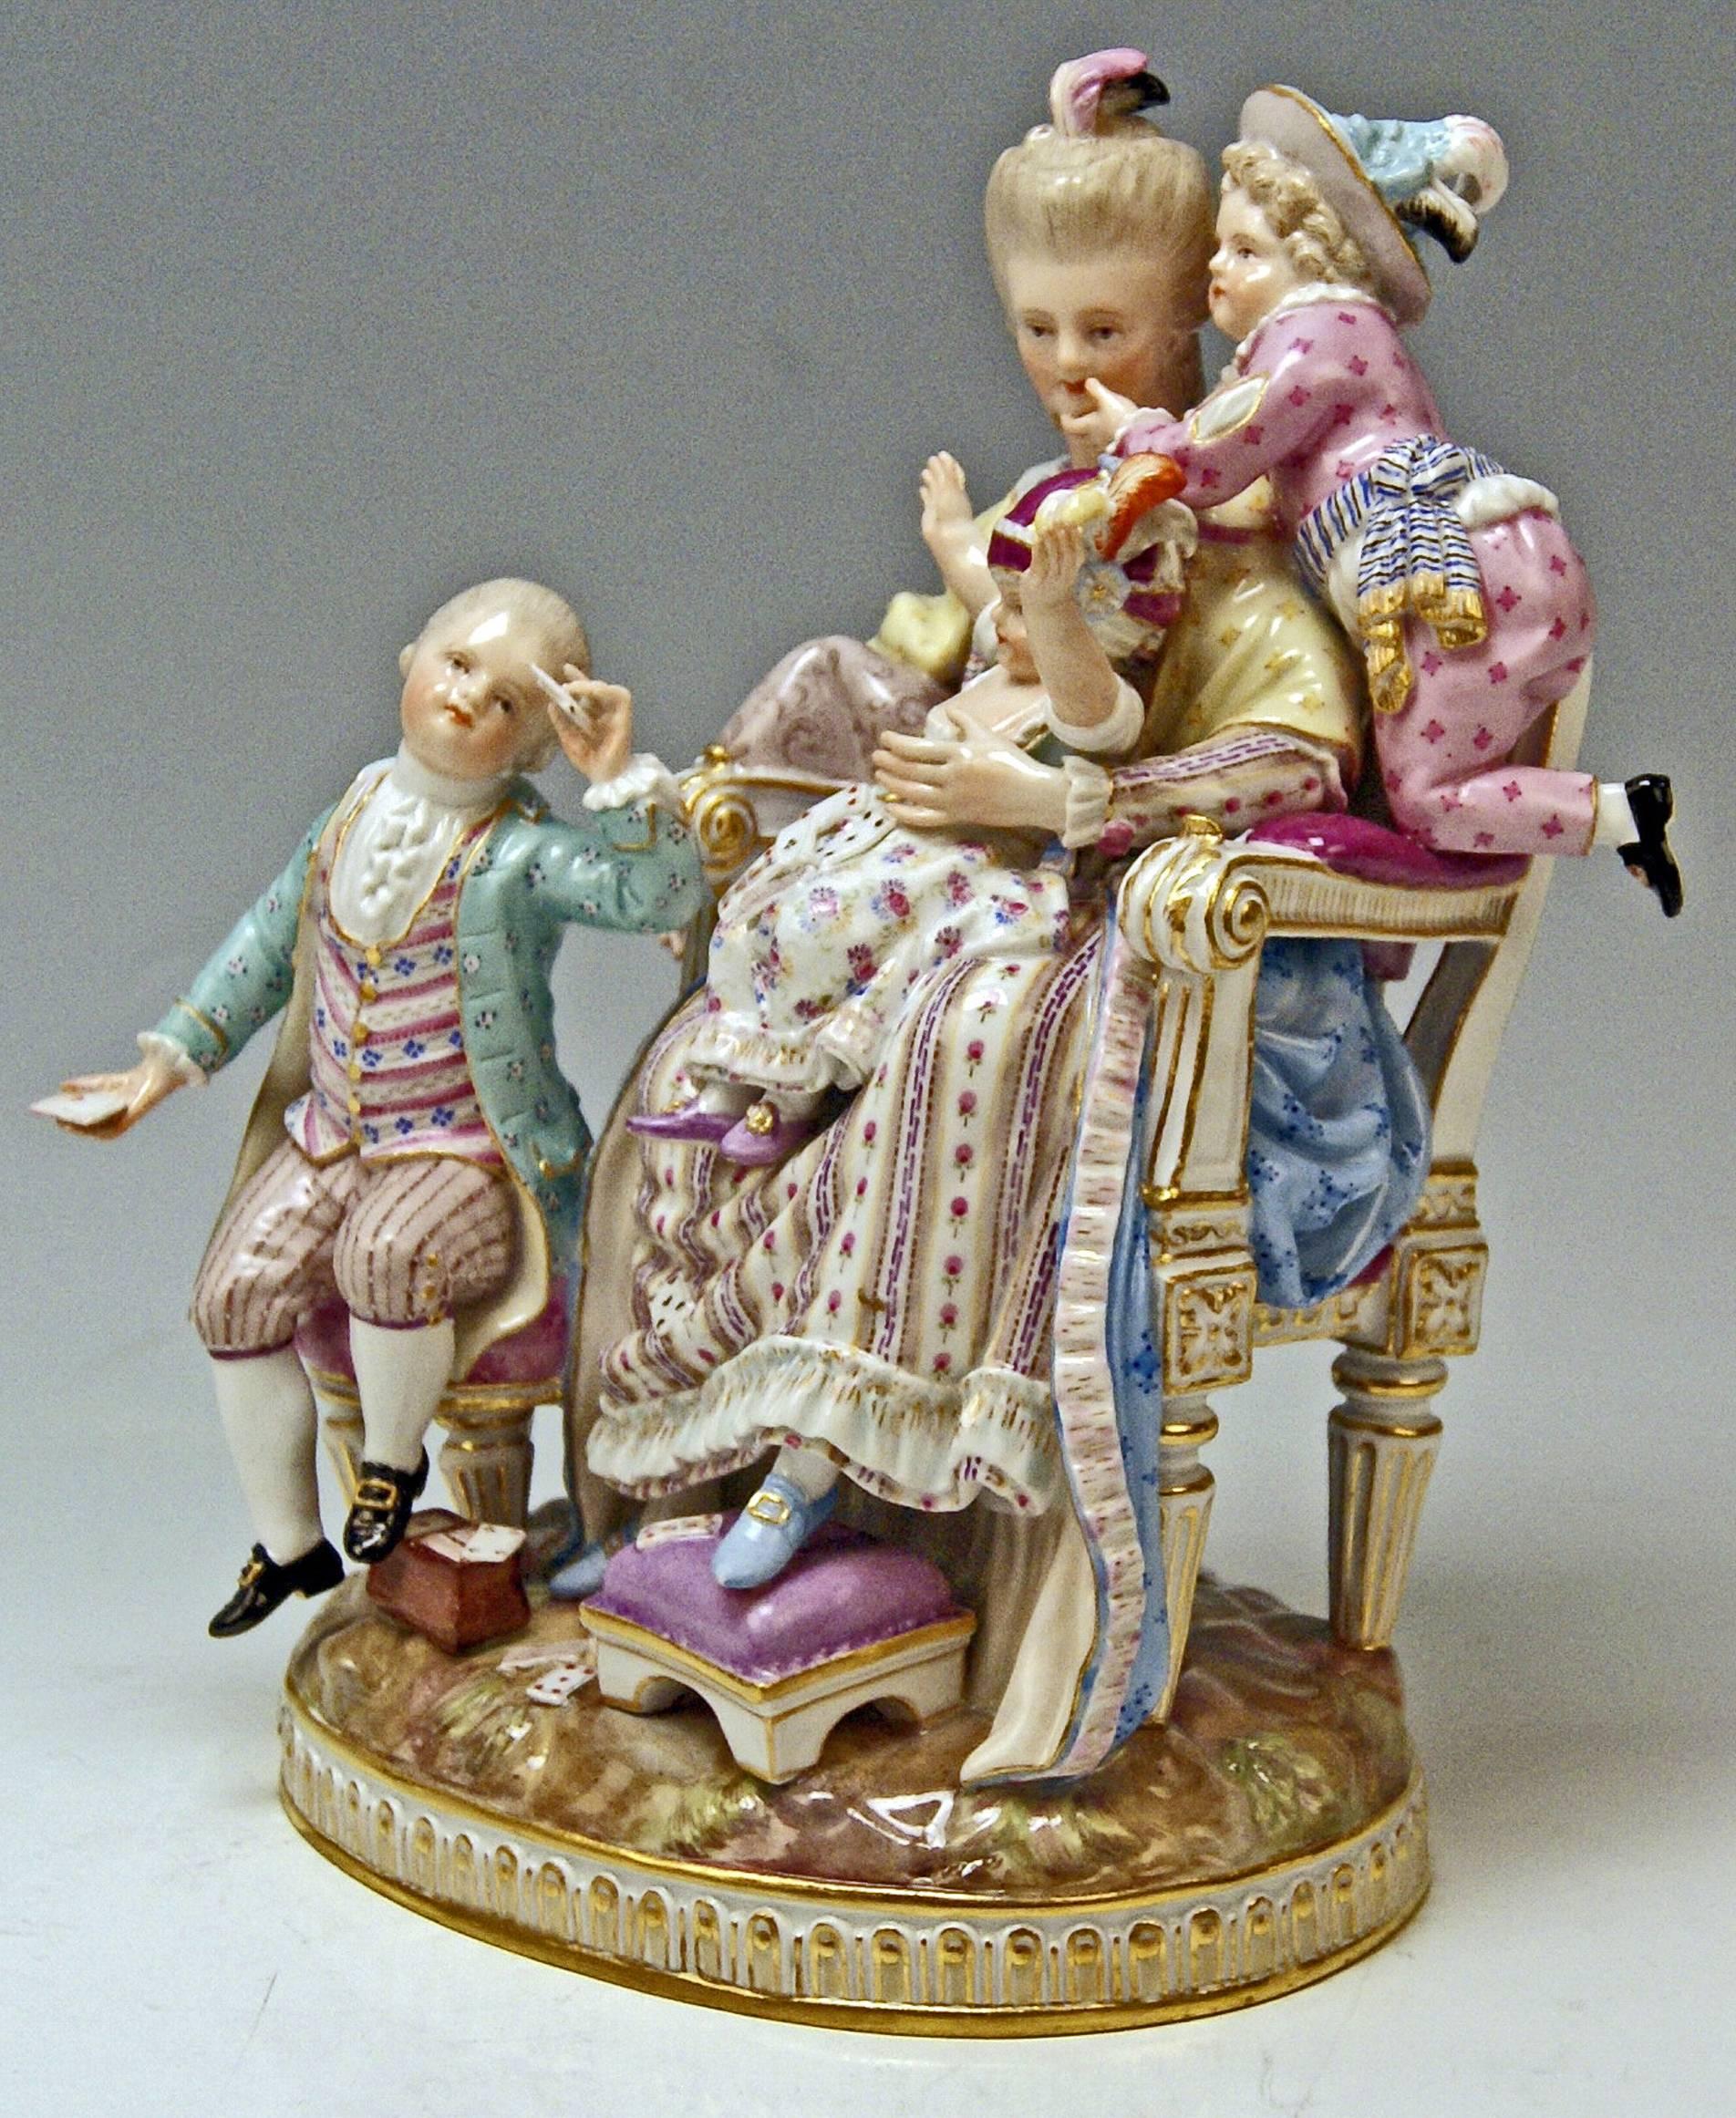 Meissen most remarkable figurine group by Michel Victor Acier (1774): The Loving Mother

Designer: 
Michel Victor Acier (born in 1736 at Versailles, France - died 1799 at Dresden, Germany)  
The sculptor had studied at Academy of Fine Arts in